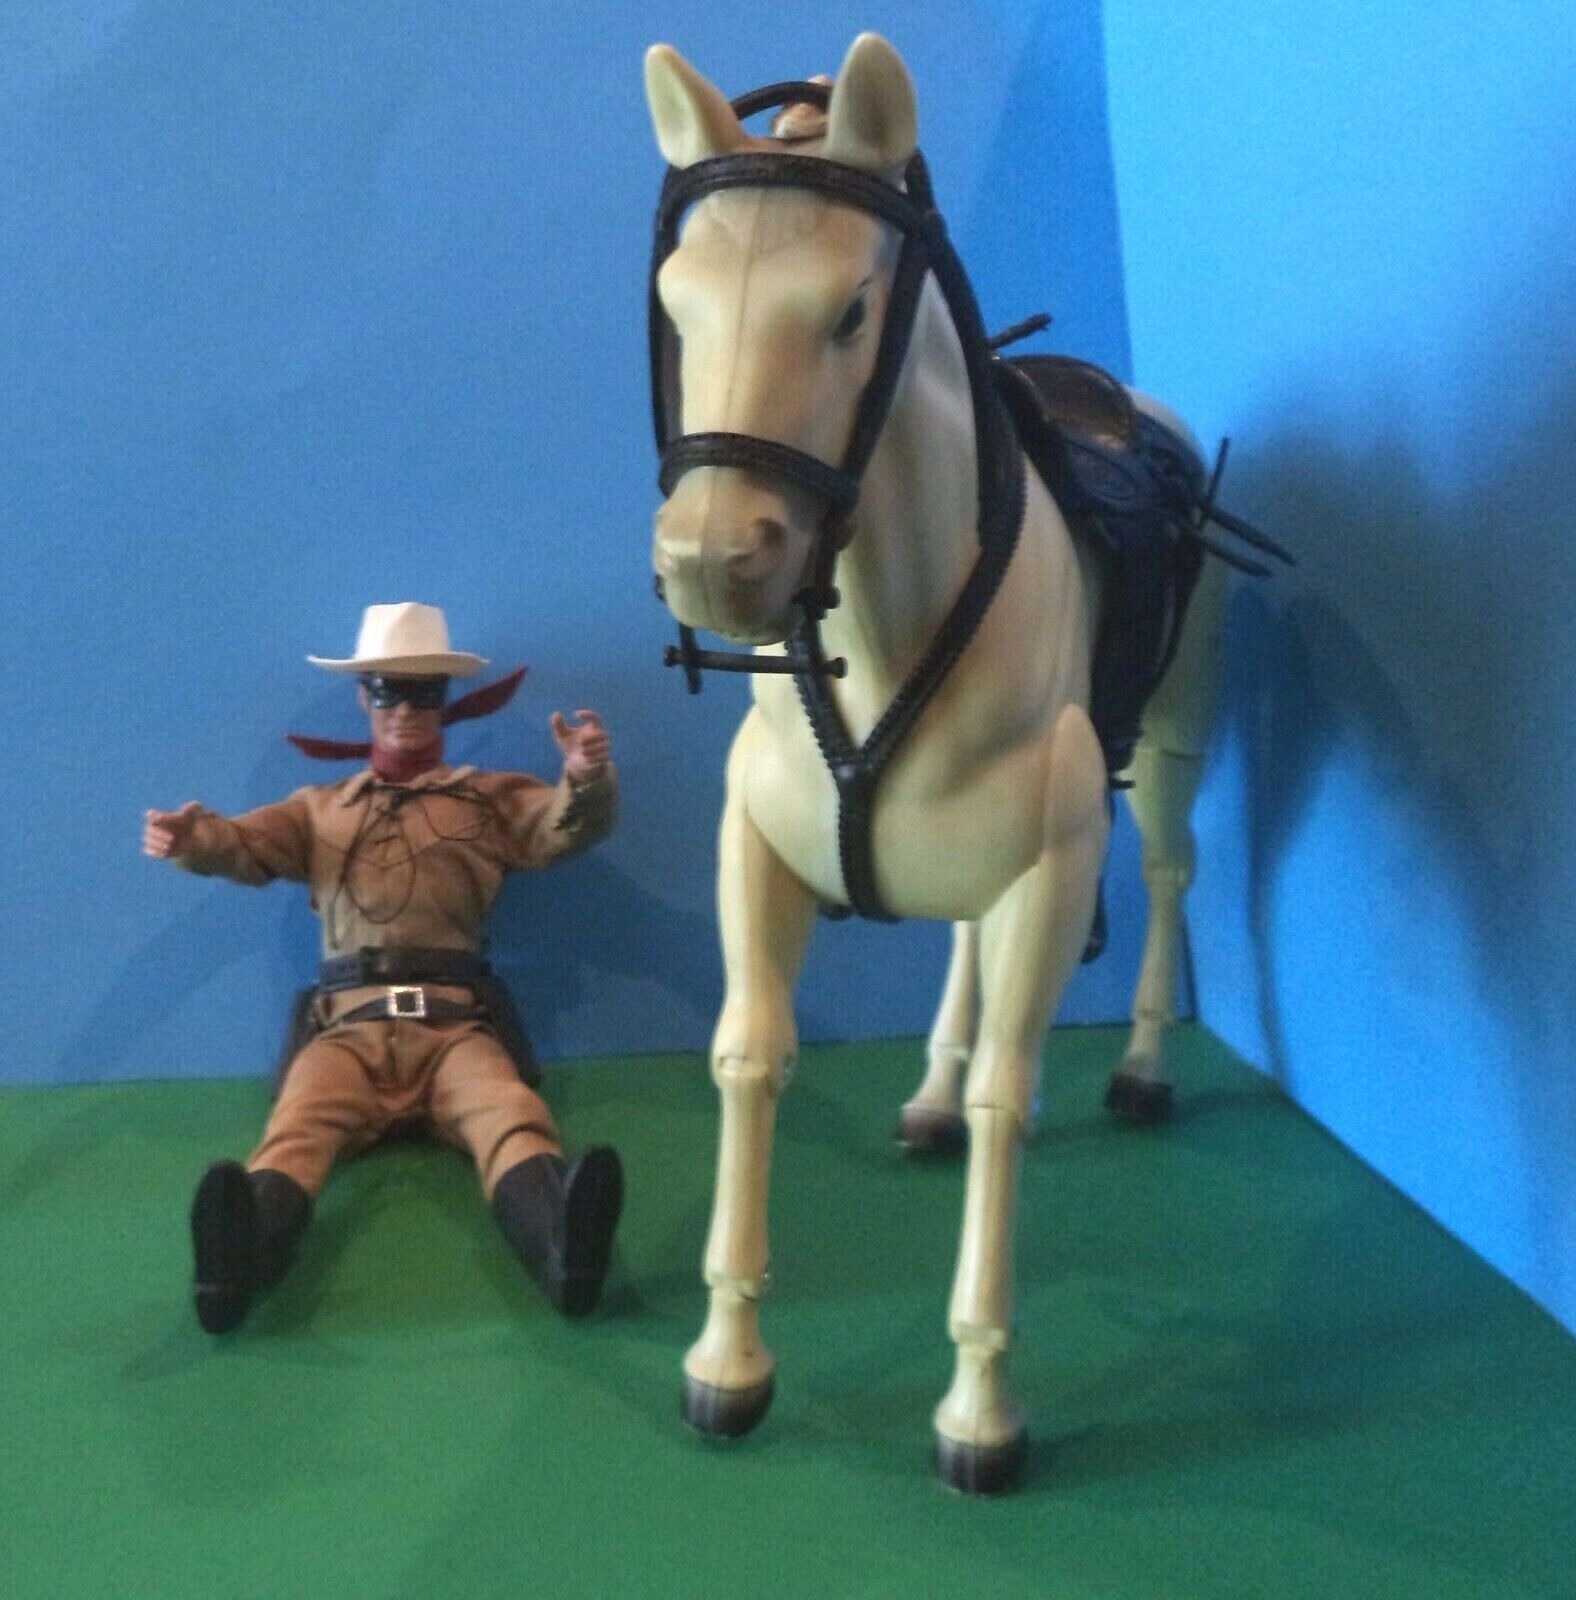 VTG 1973 HUBLEY"SILVER HORSE" WITH ORIG BOX & LONE RANGER ACTION FIGURE-LOT OF 2 Hubley